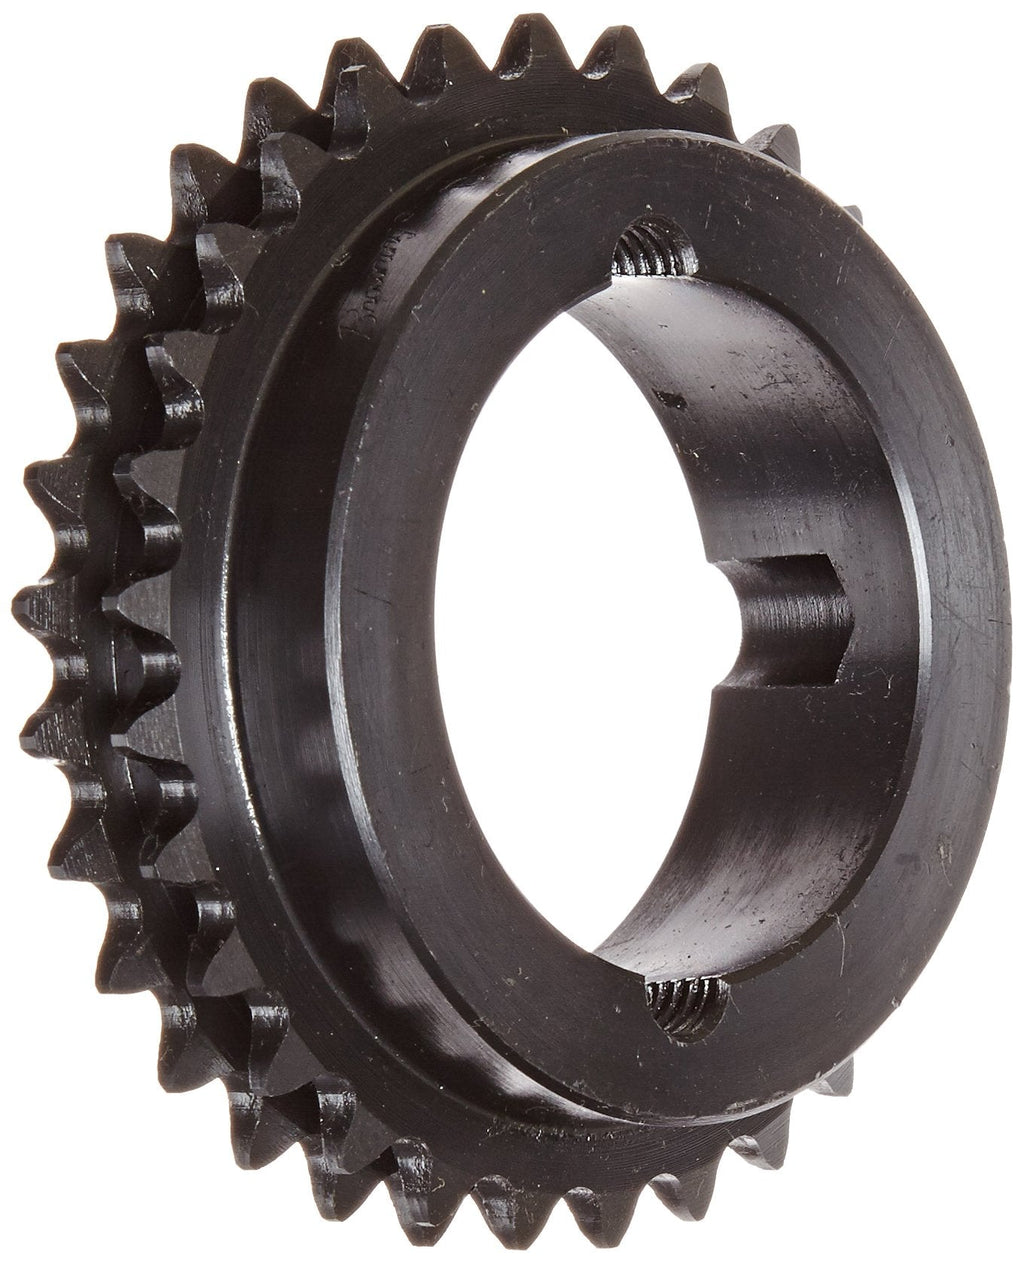  [AUSTRALIA] - Browning D35TB30 Roller Chain Sprocket, 2 Strand, Taper Bore, Bushed, Steel, 35 Pitch, 30 Teeth